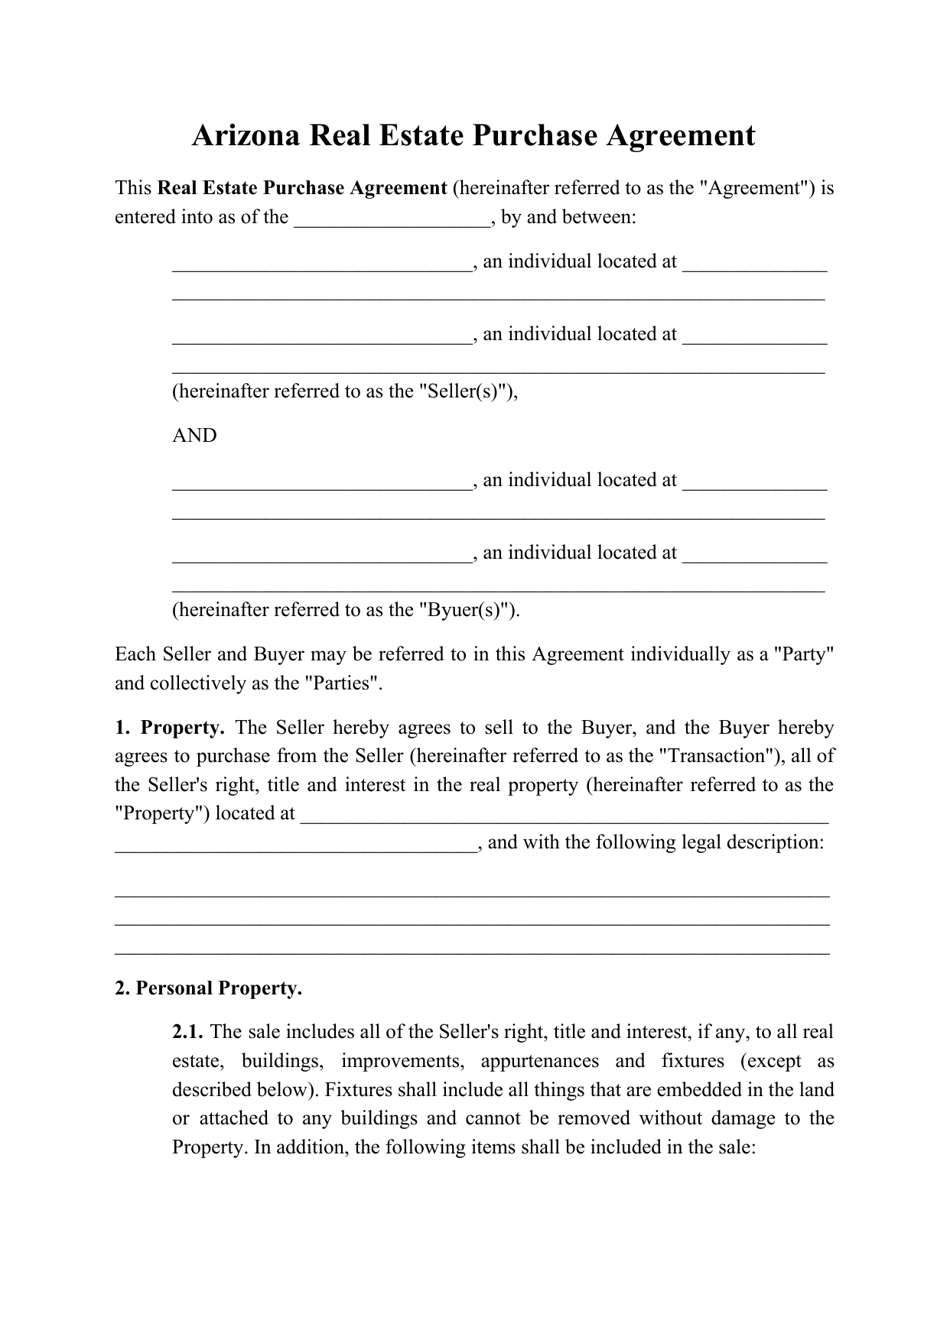 arizona-real-estate-purchase-agreement-template-fill-out-sign-online-and-download-pdf